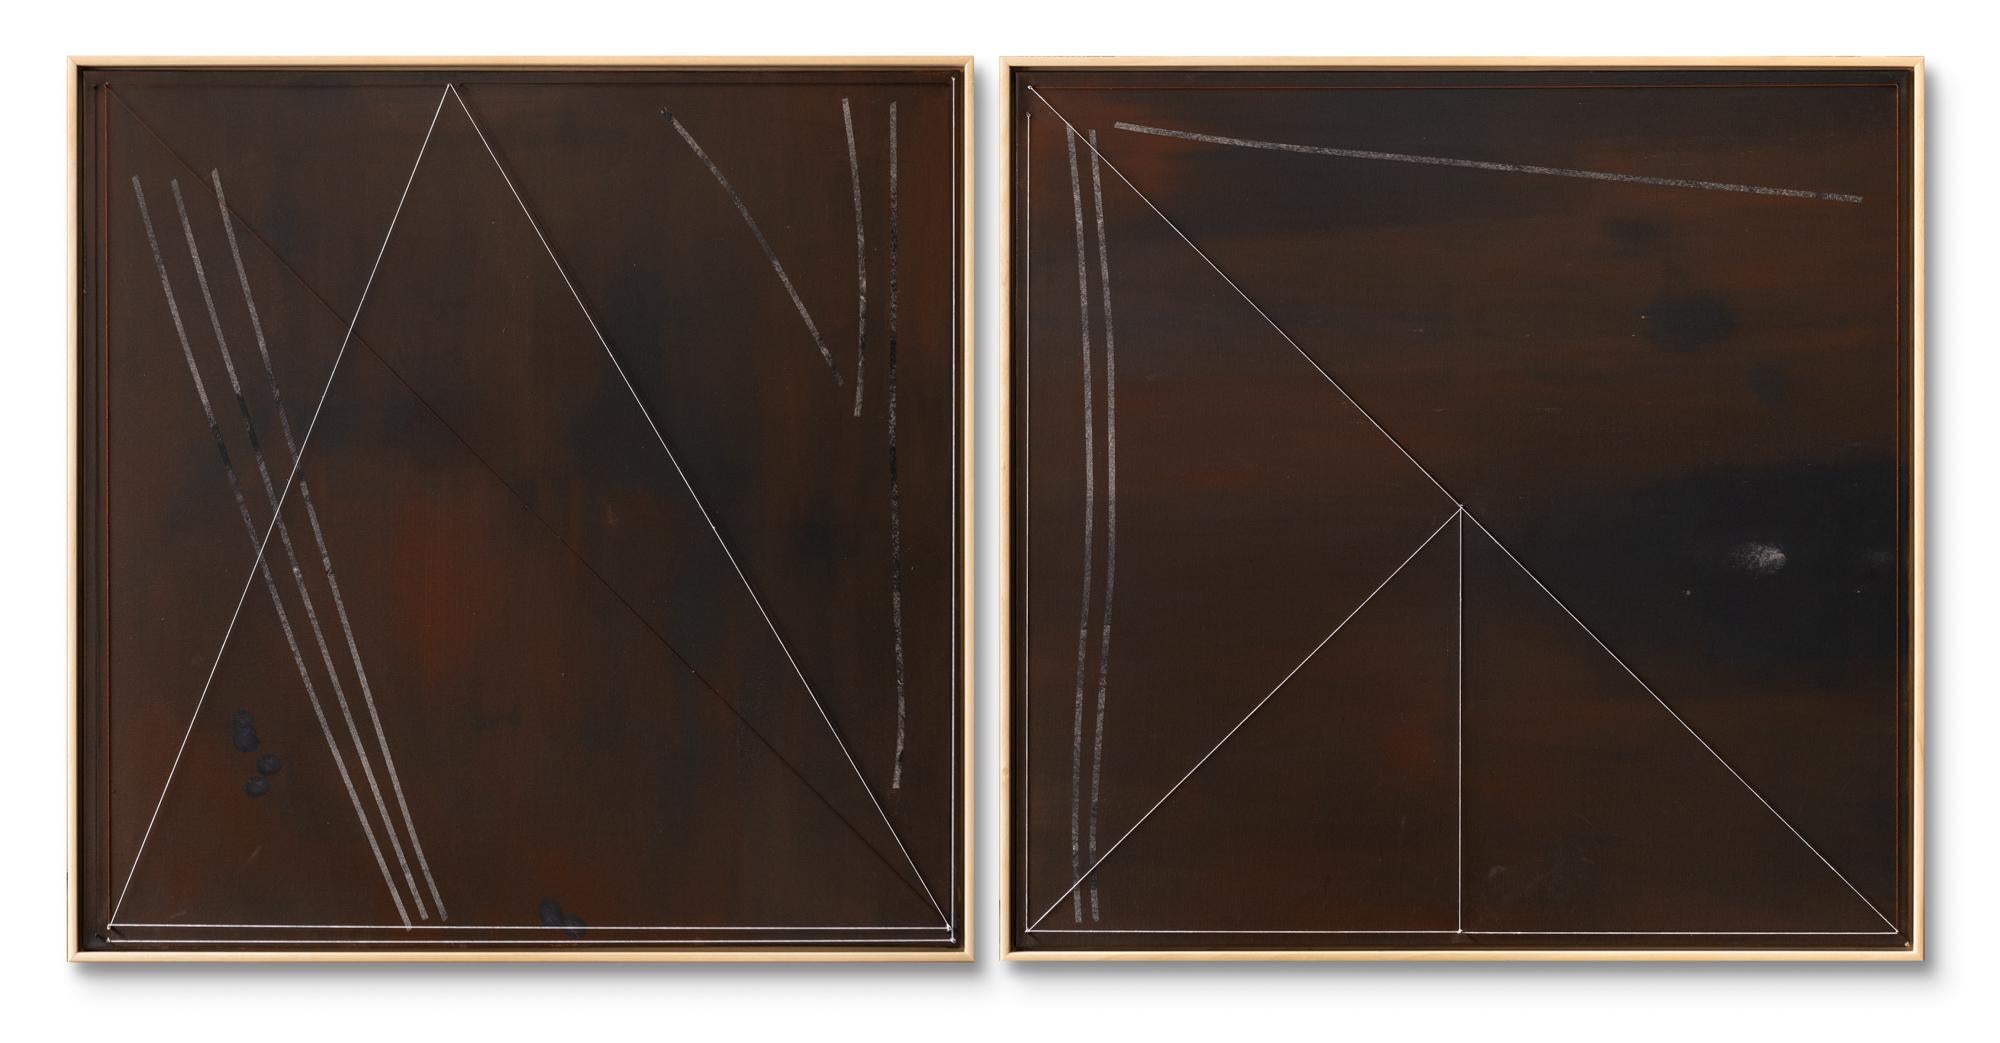 Hyland Mather AKA X-O Abstract Painting - "RED HILLS RED RIVER" (diptych)